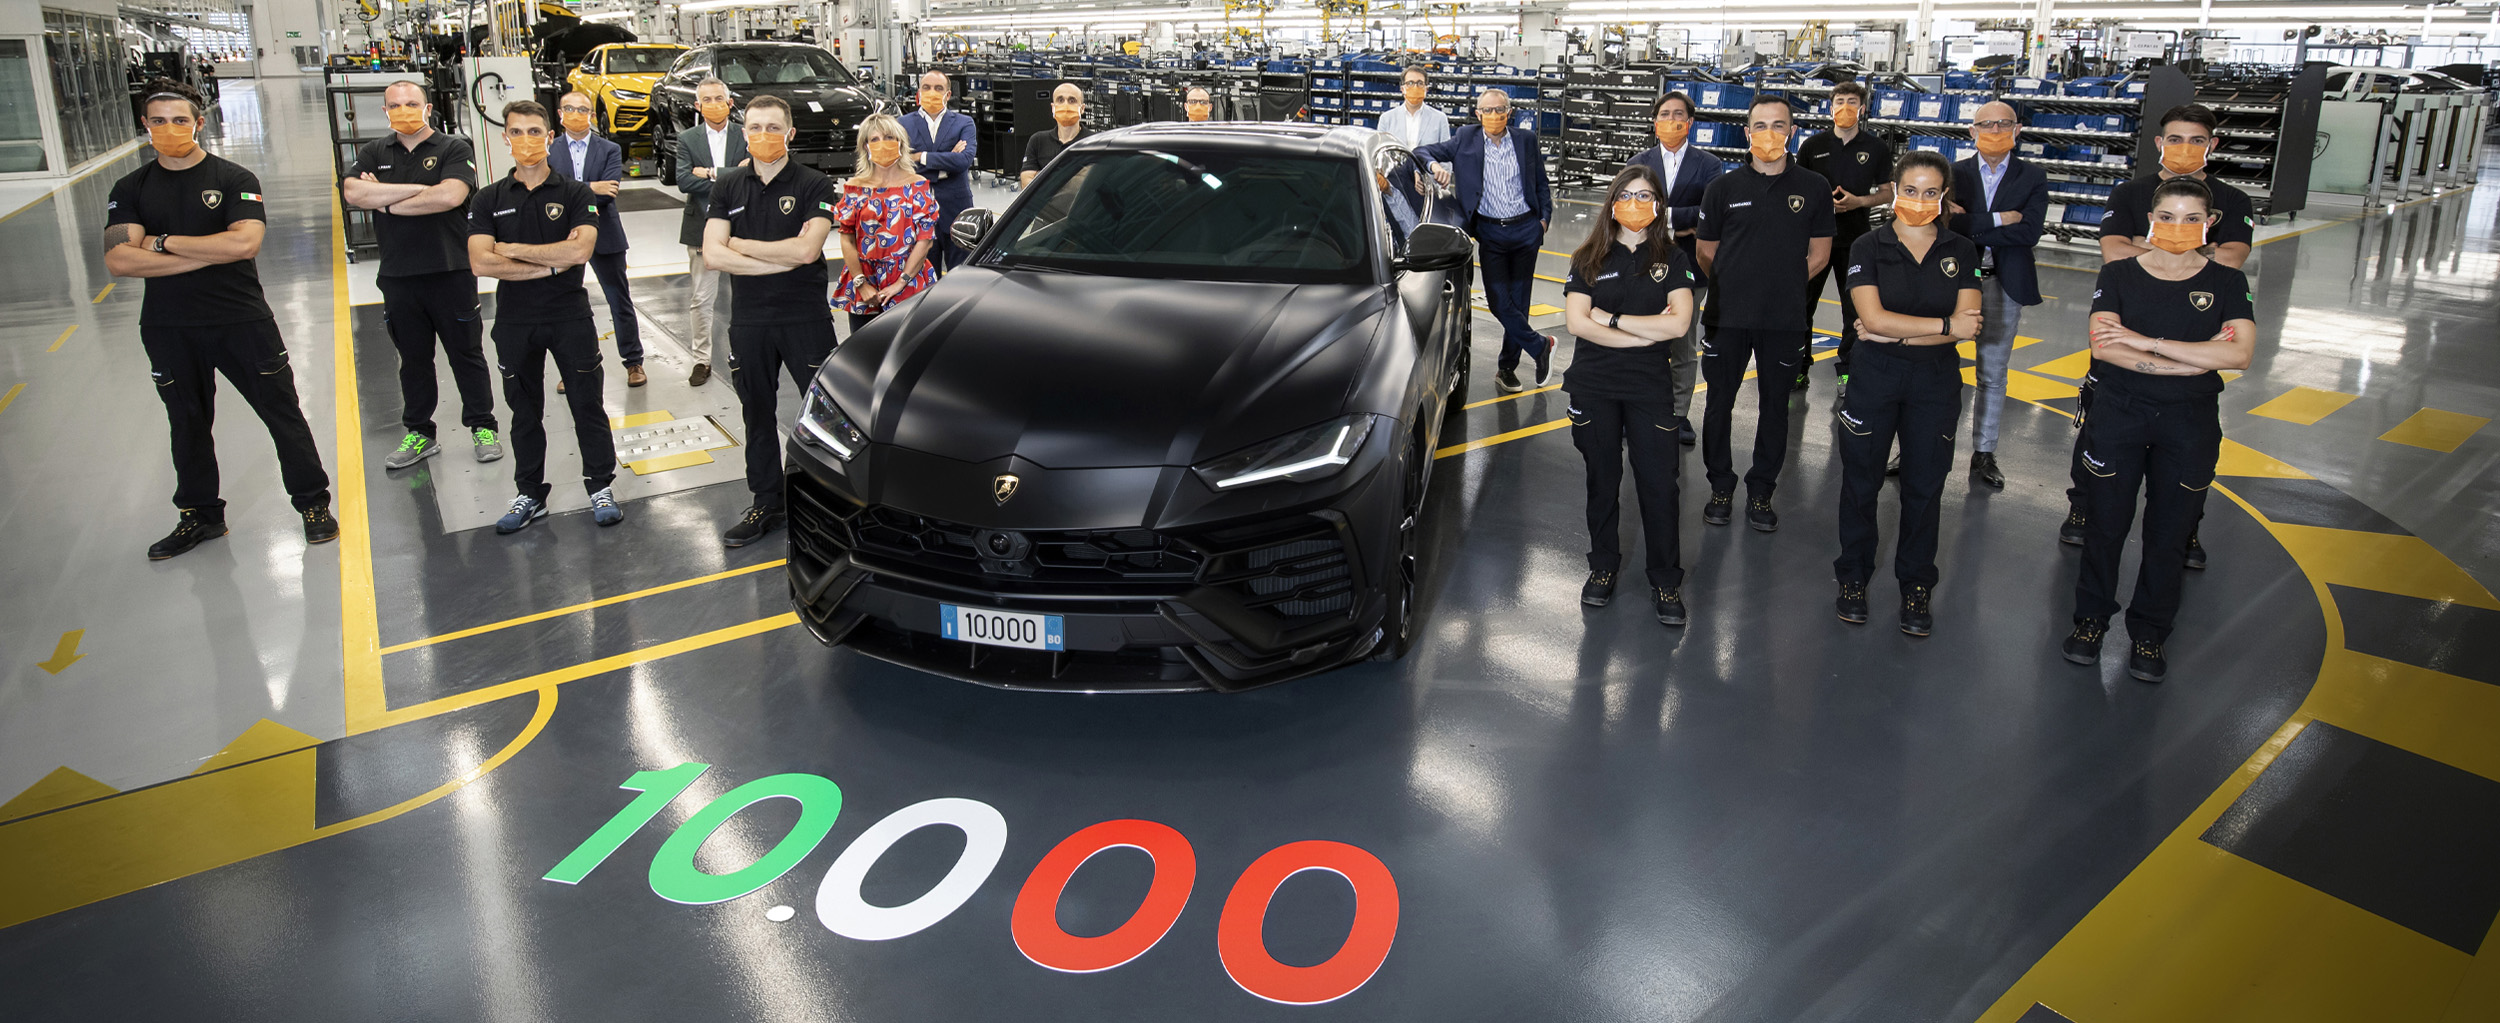 A Conversation With Katia Bassi, Chief Marketing And Communications Officer Of Automobili Lamborghini